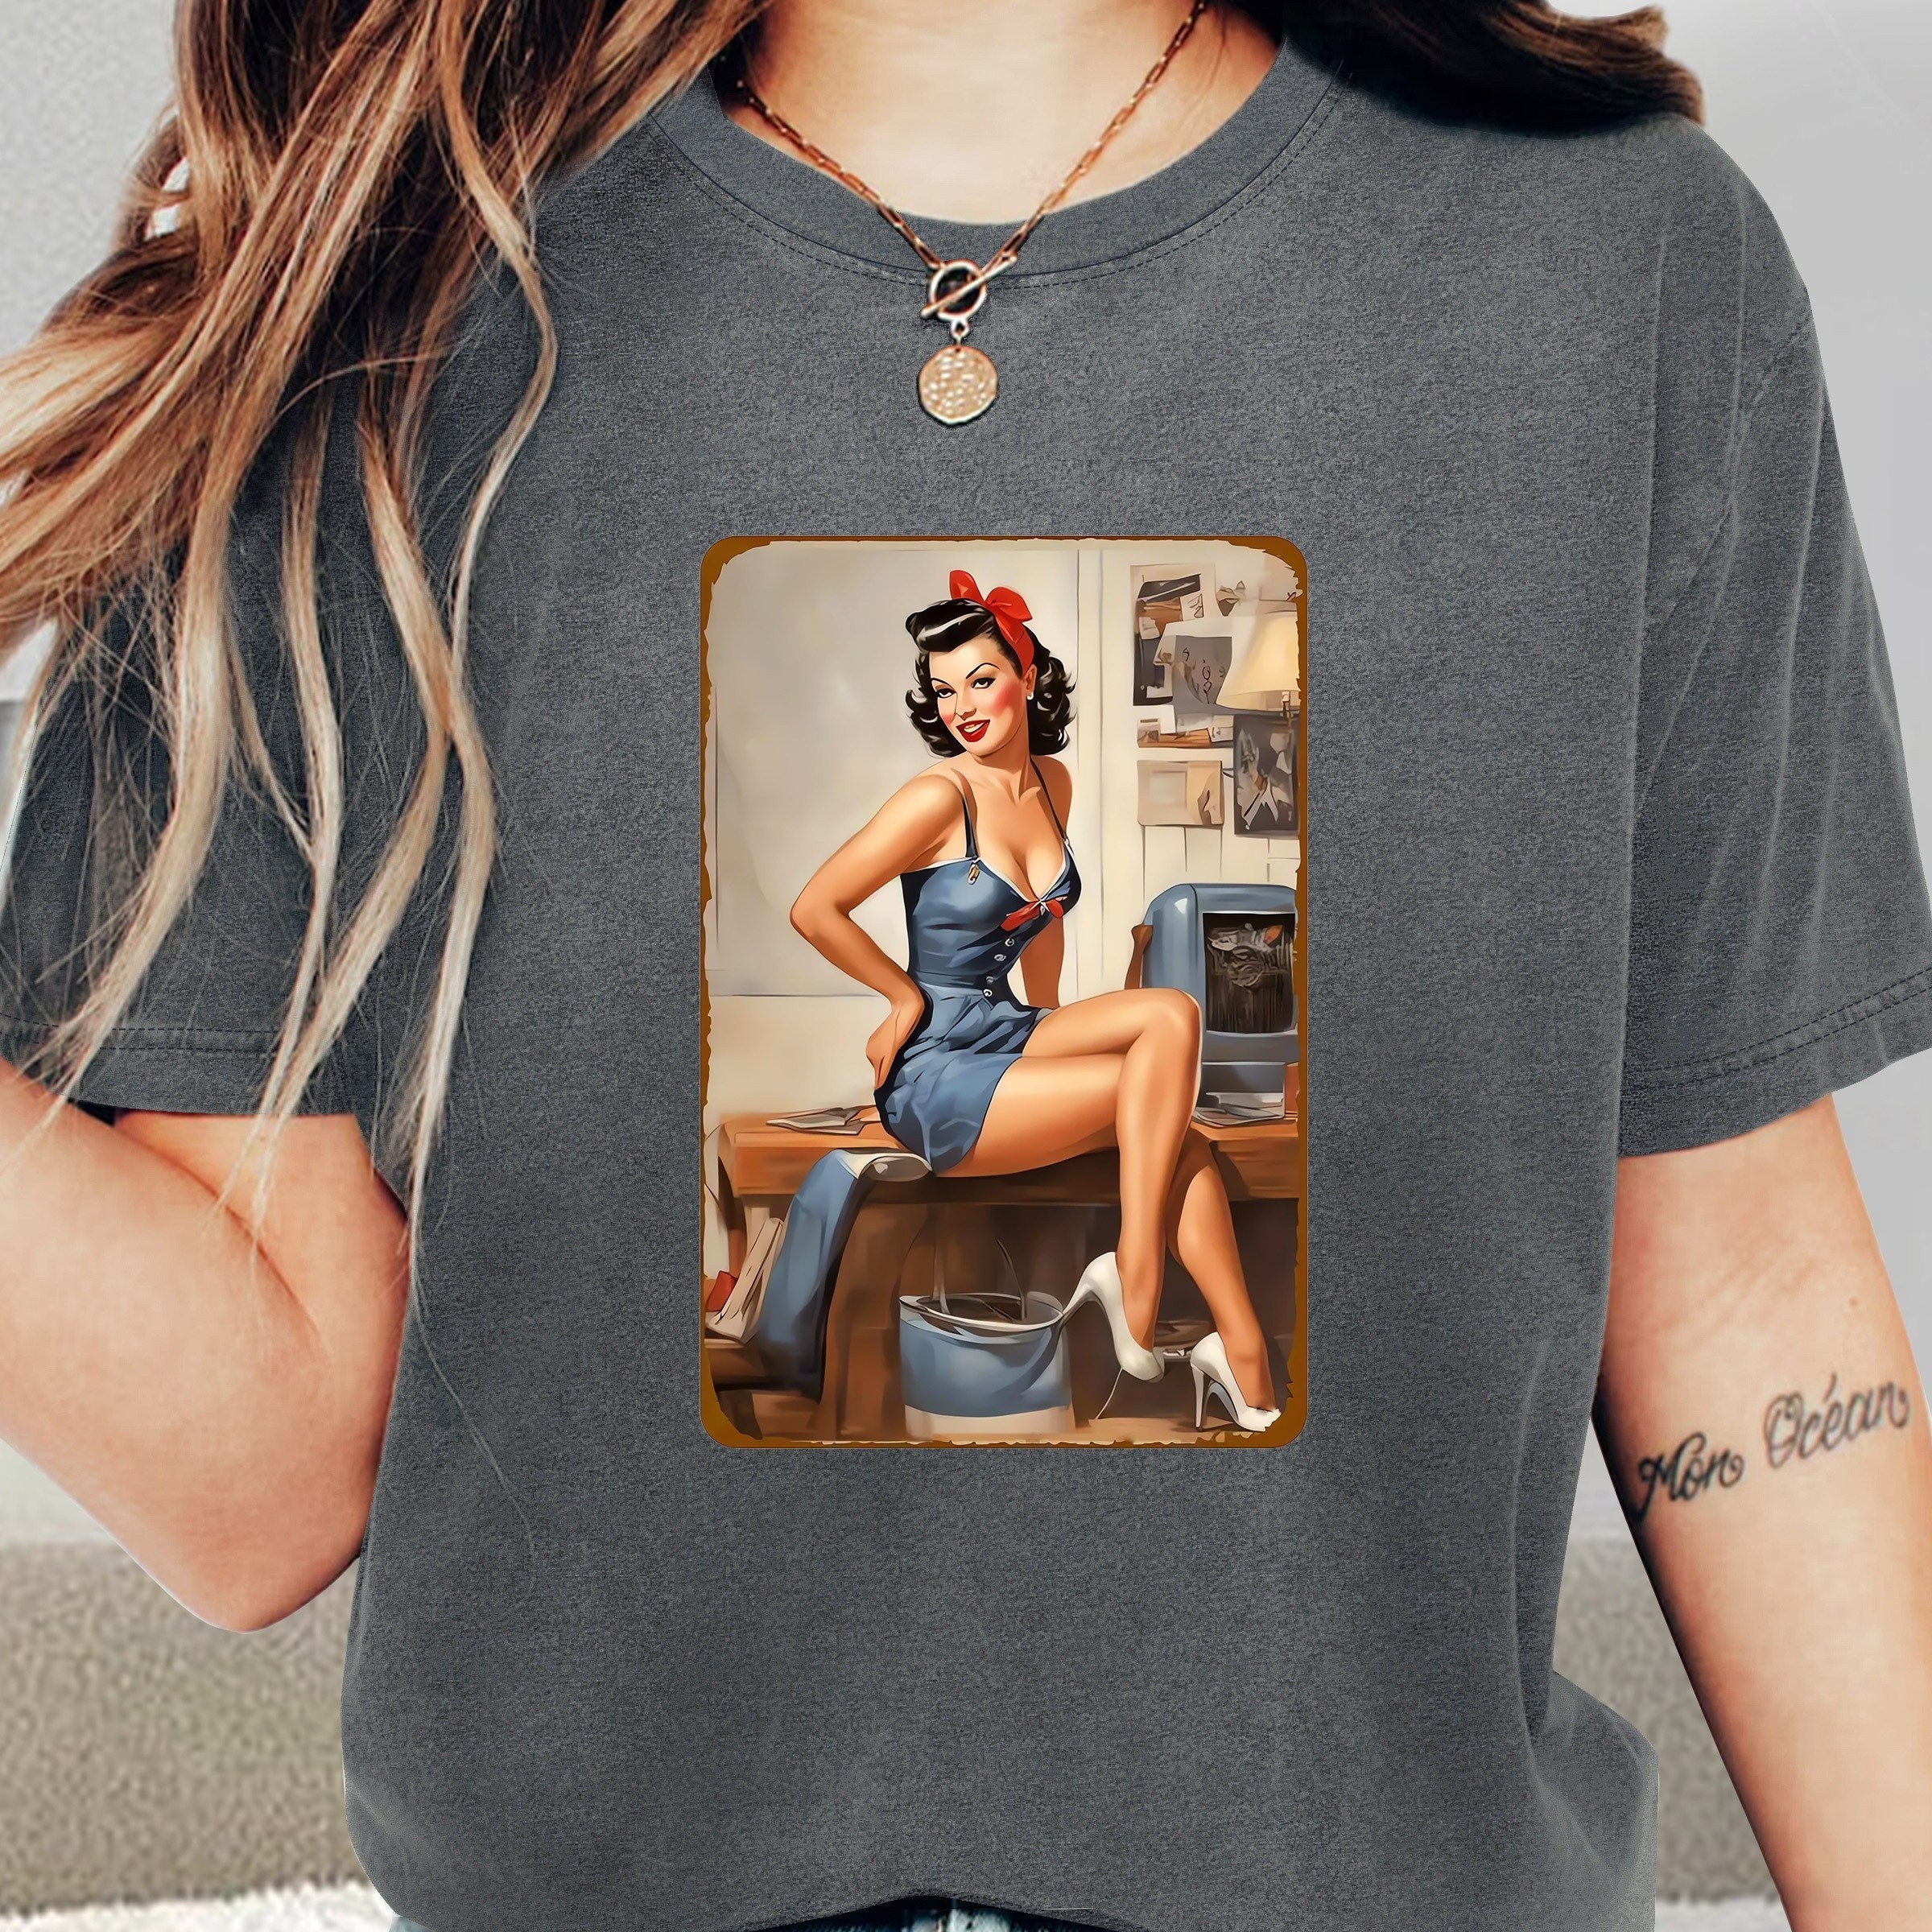 

Women's Vintage Girl Graphic T-shirt, Movie Star Print, Fashionable Retro Casual Athletic Style, Round Neck Short Sleeve Top